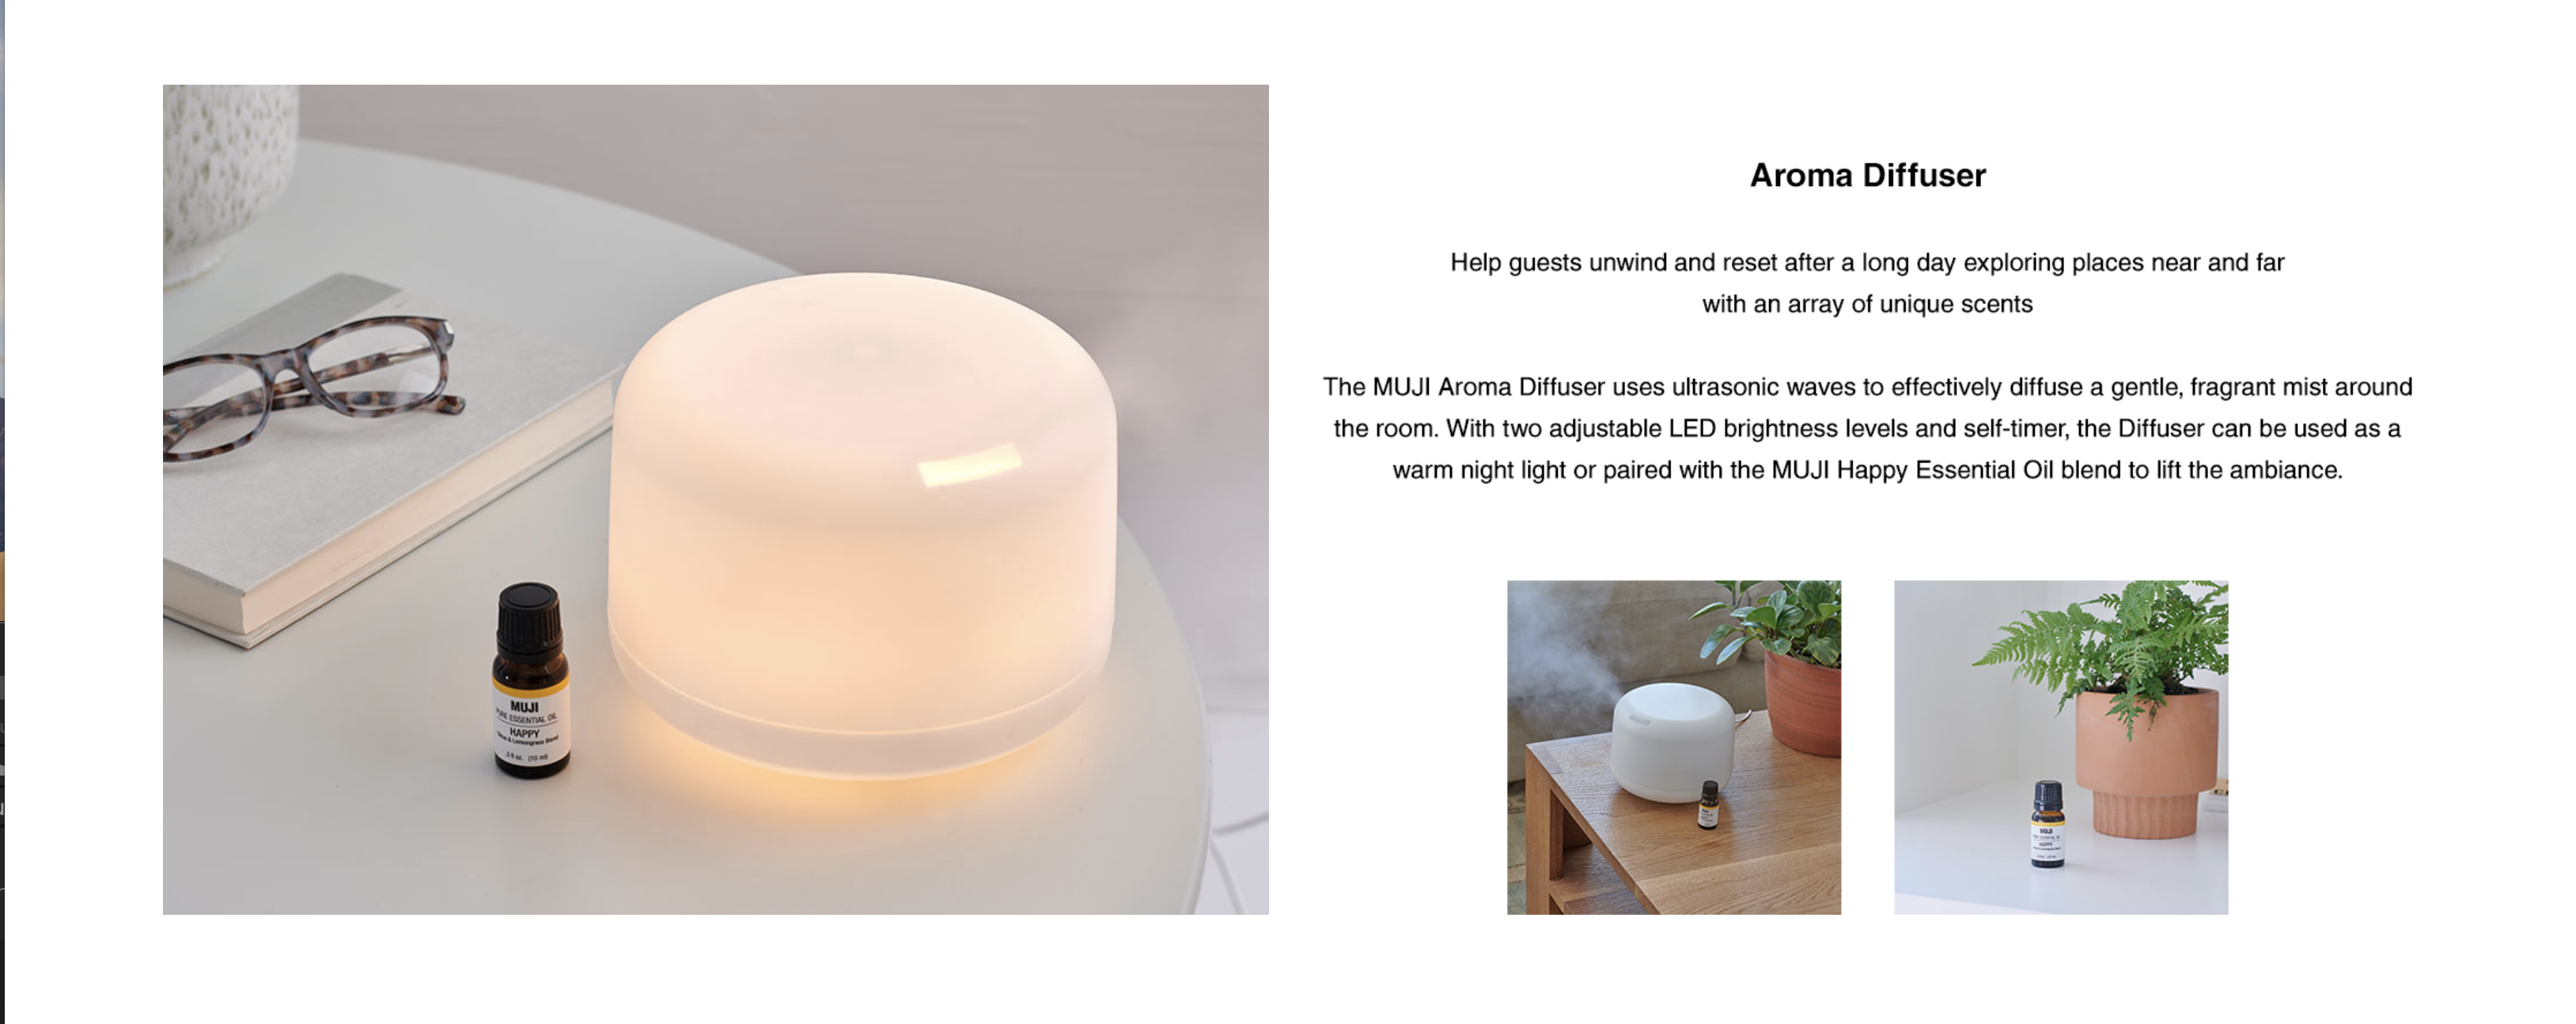 Air bnb and muji ad with lgith up humidifier by Alison Gootee Photography